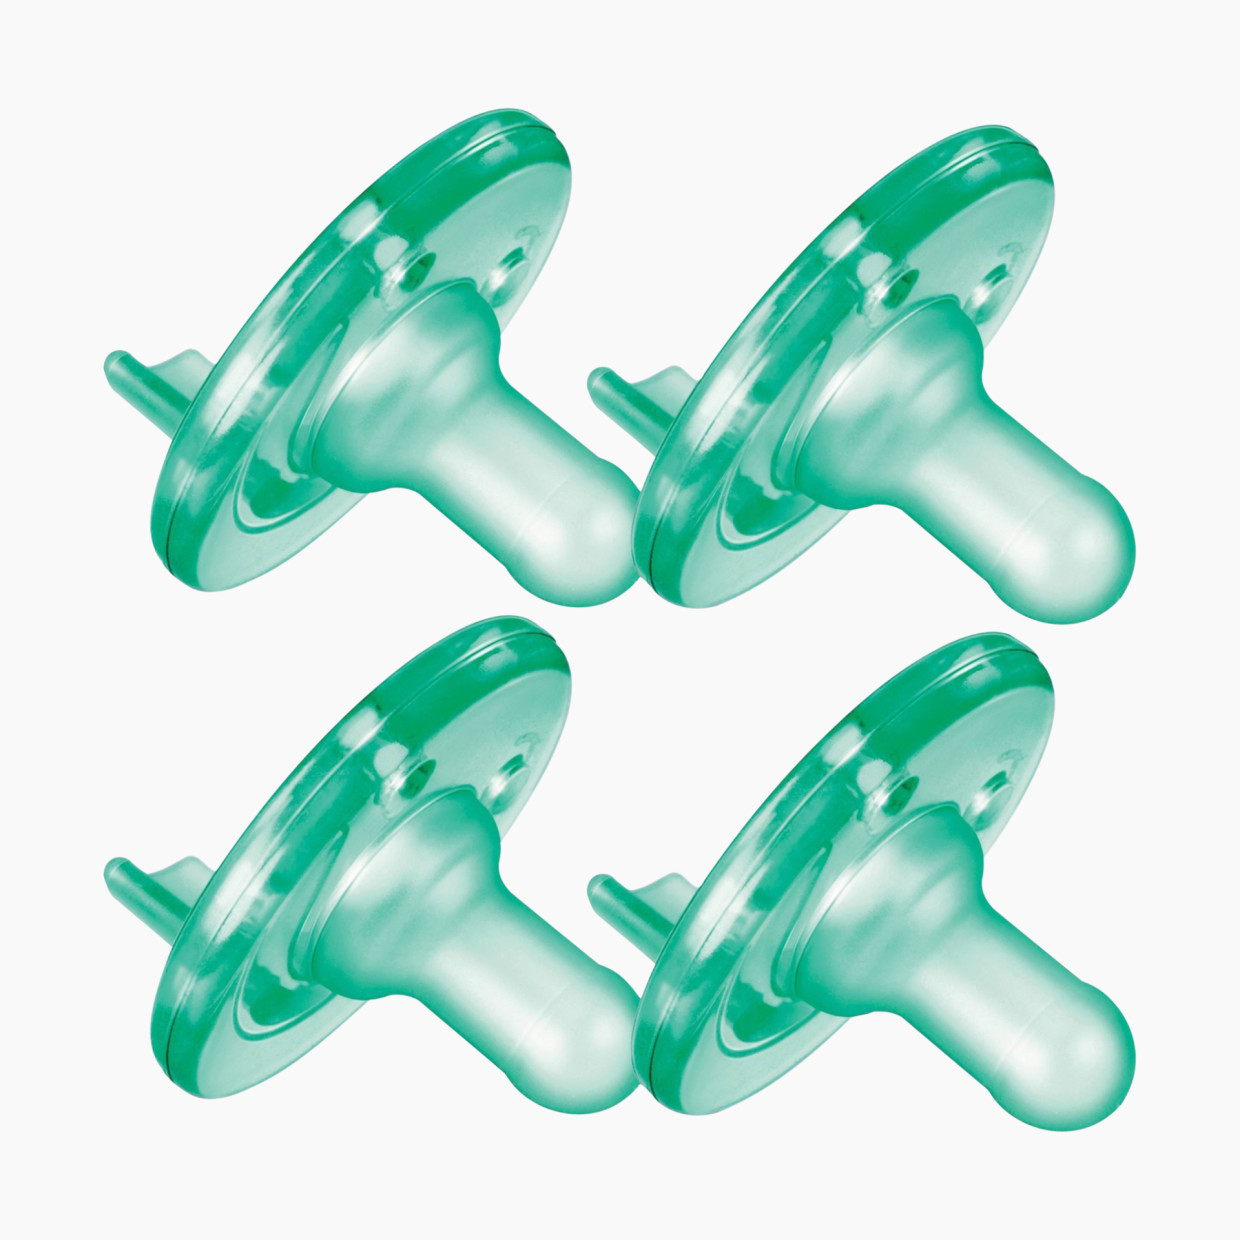 Philips Avent Soothie Pacifier, 0-3 months (4 Pack) - Green.